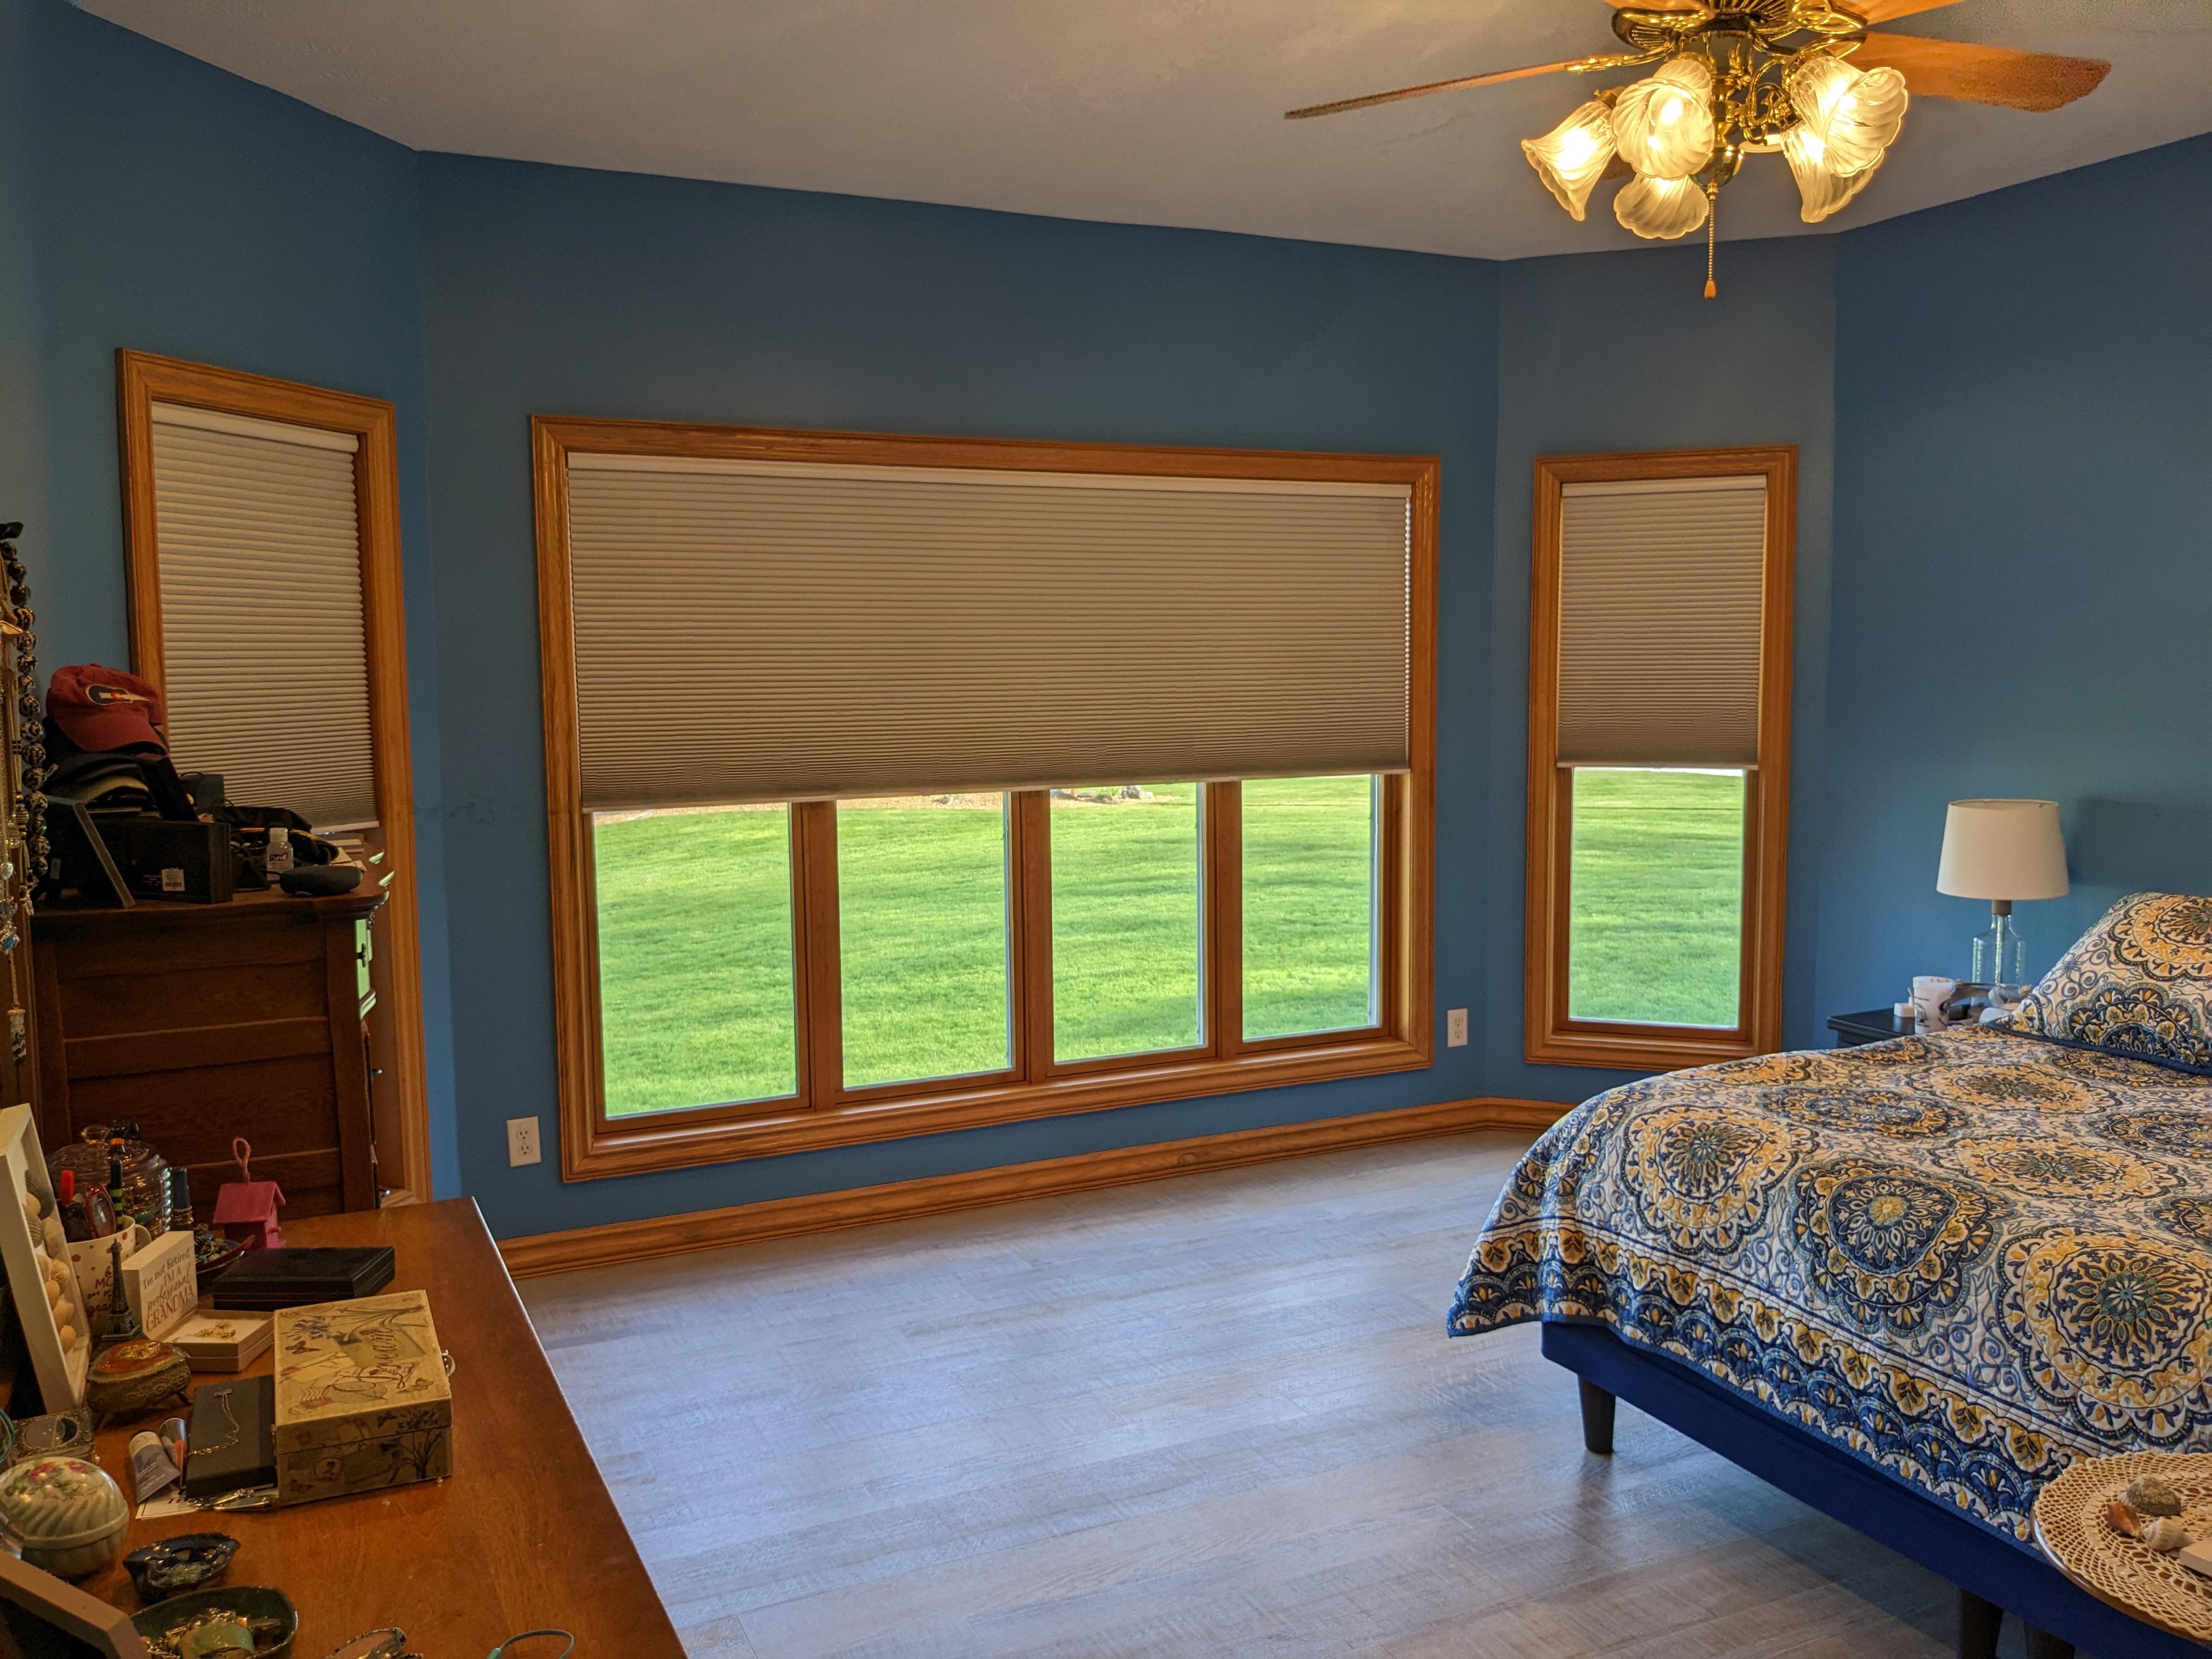 Cordless room darkening cellular shades in Springfield Illinois bedroom.  BudgetBlinds  WindowCoverings  Shades  CellularShades